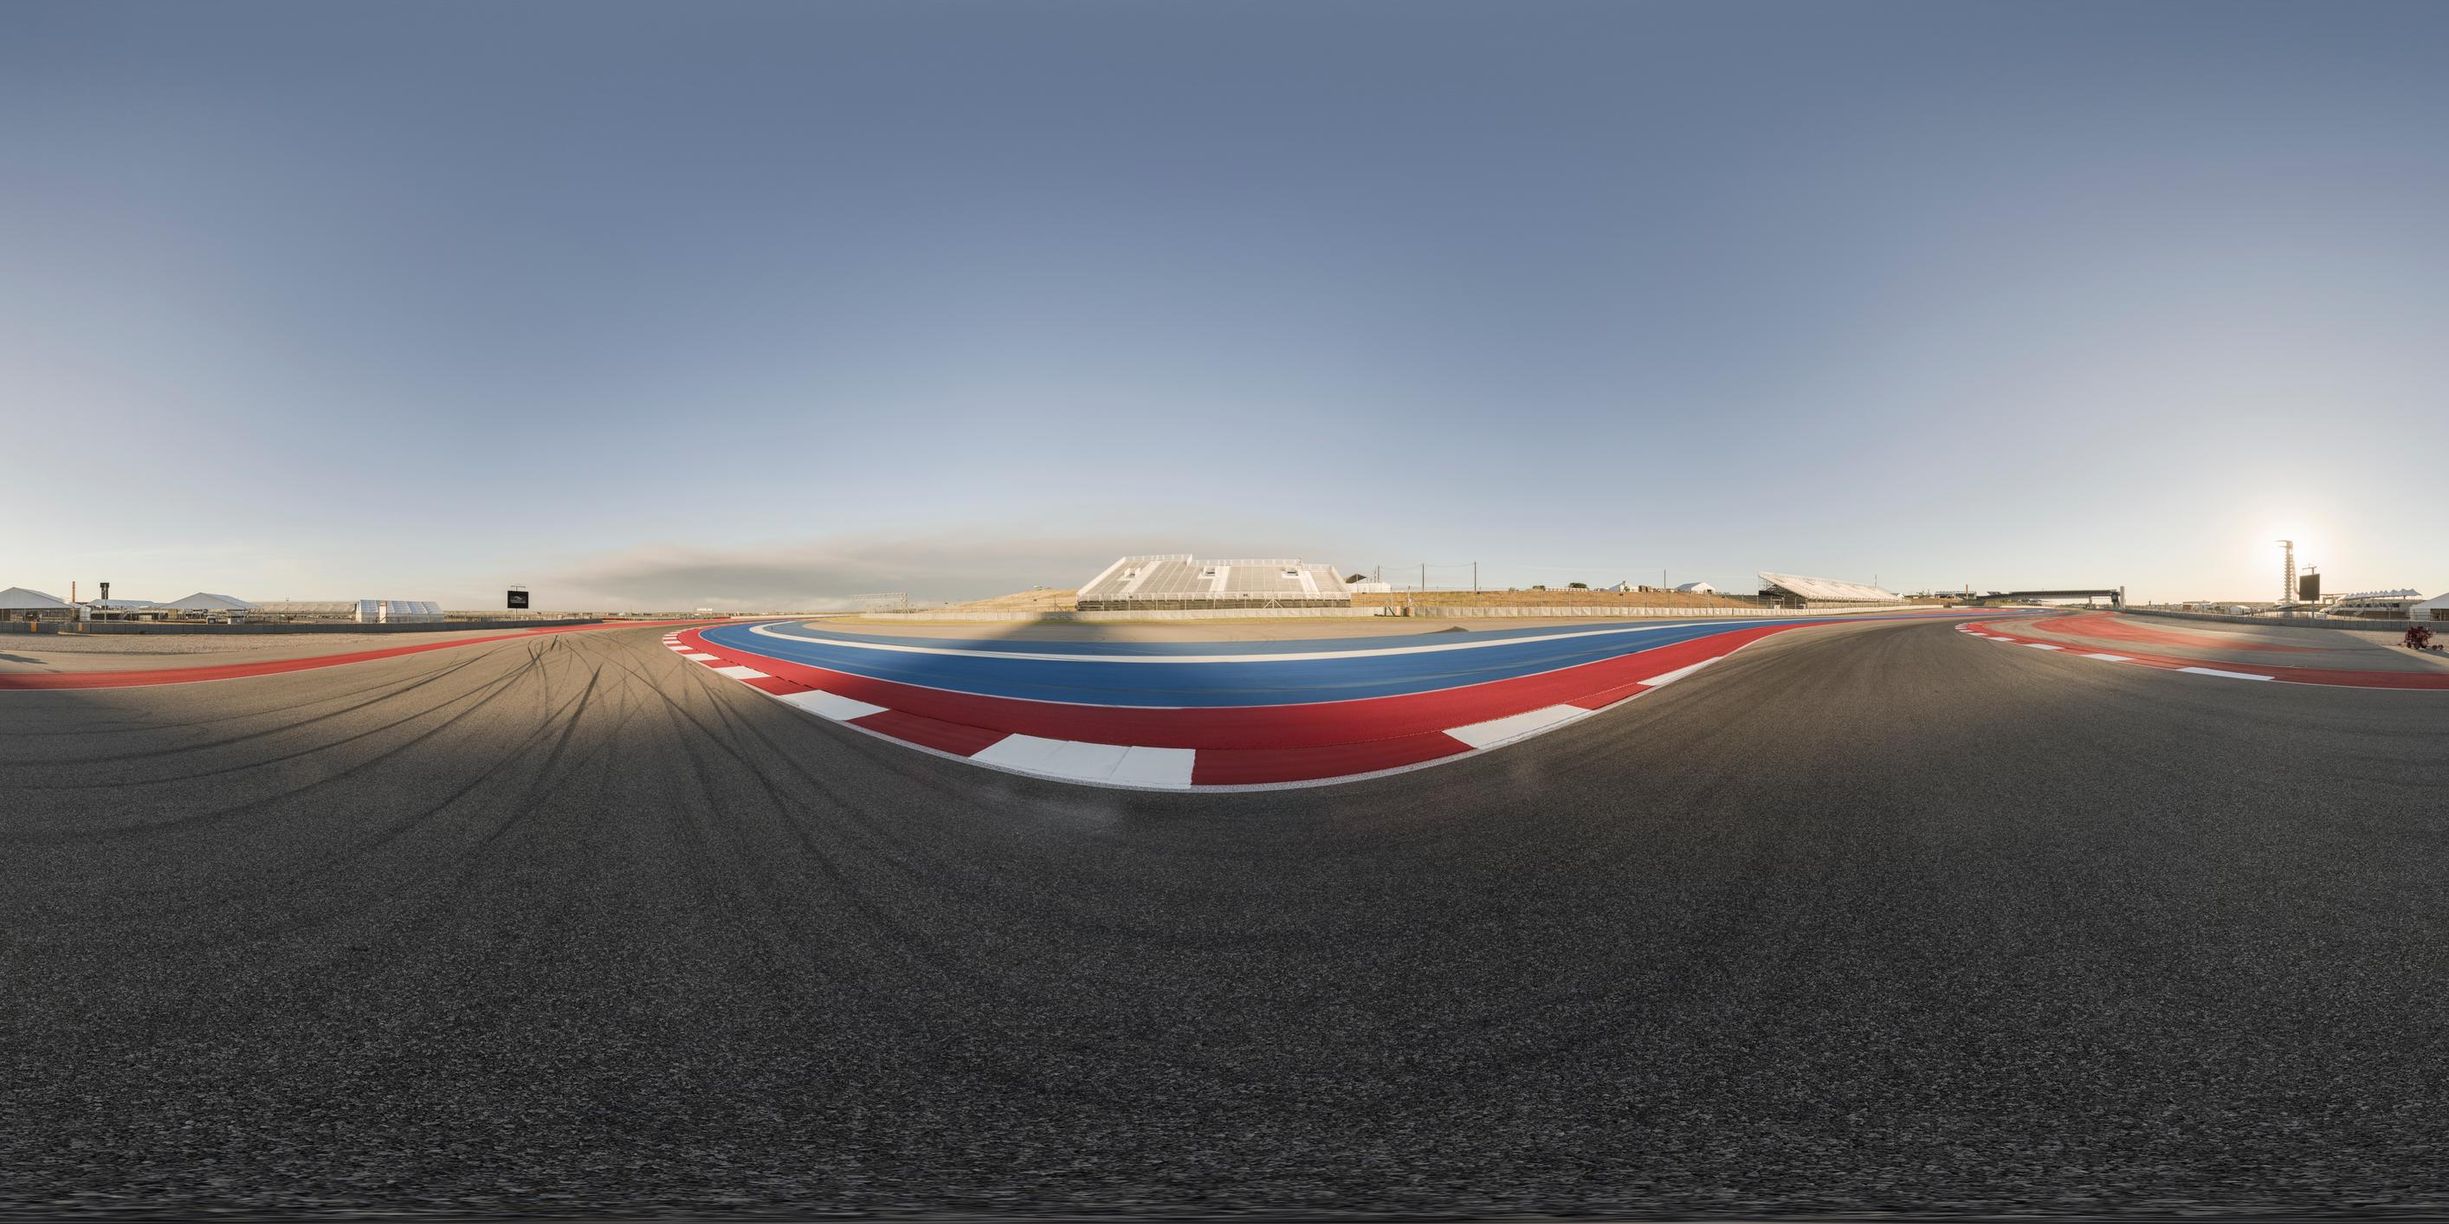 a view of an open race track from a fish eye lens in midair with a person riding a motorcycle